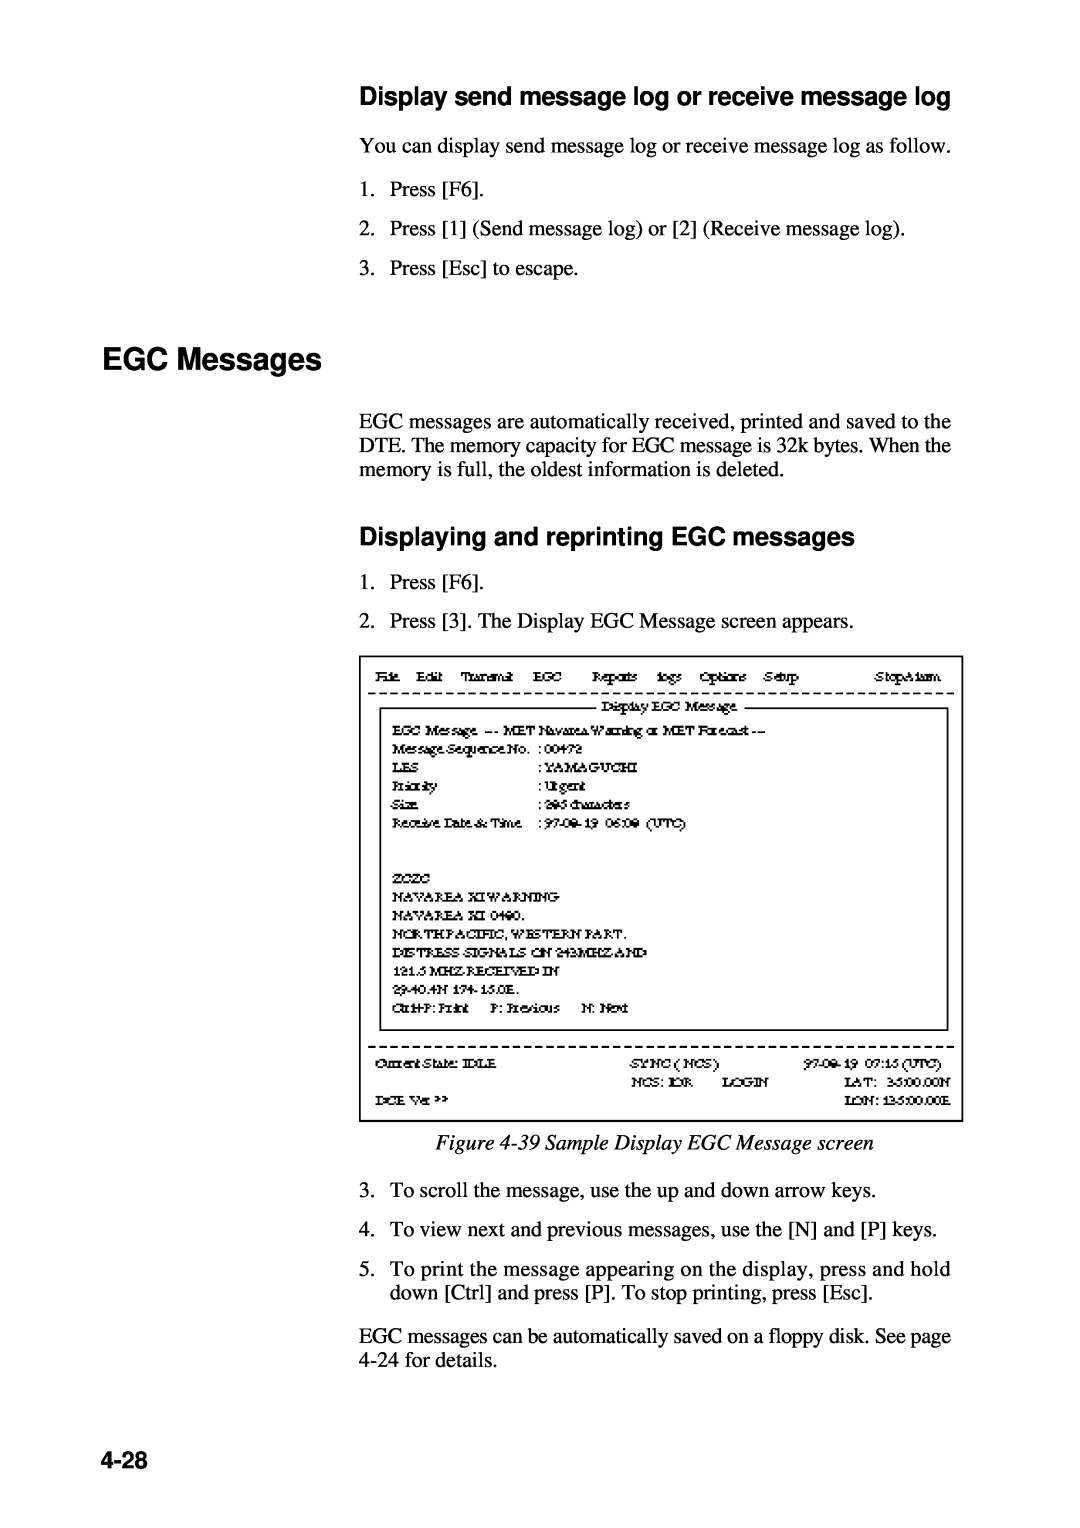 Furuno RC-1500-1T EGC Messages, Display send message log or receive message log, Displaying and reprinting EGC messages 